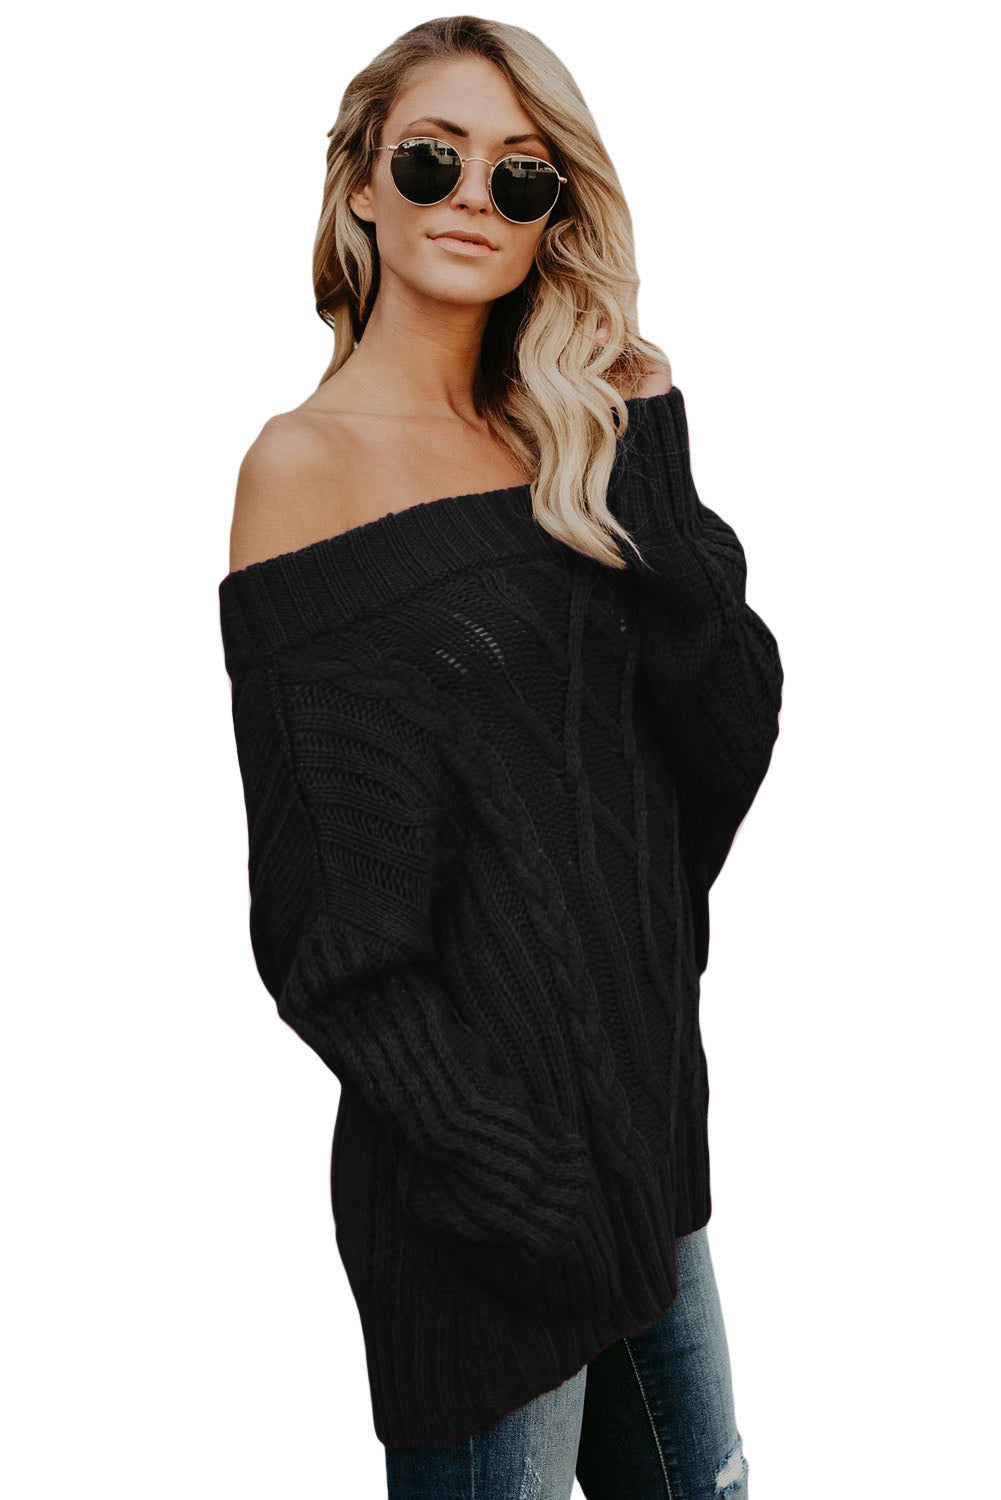 Women Sexy Off Shoulder Loose Pullover Sweater Long Sleeve Knit Top